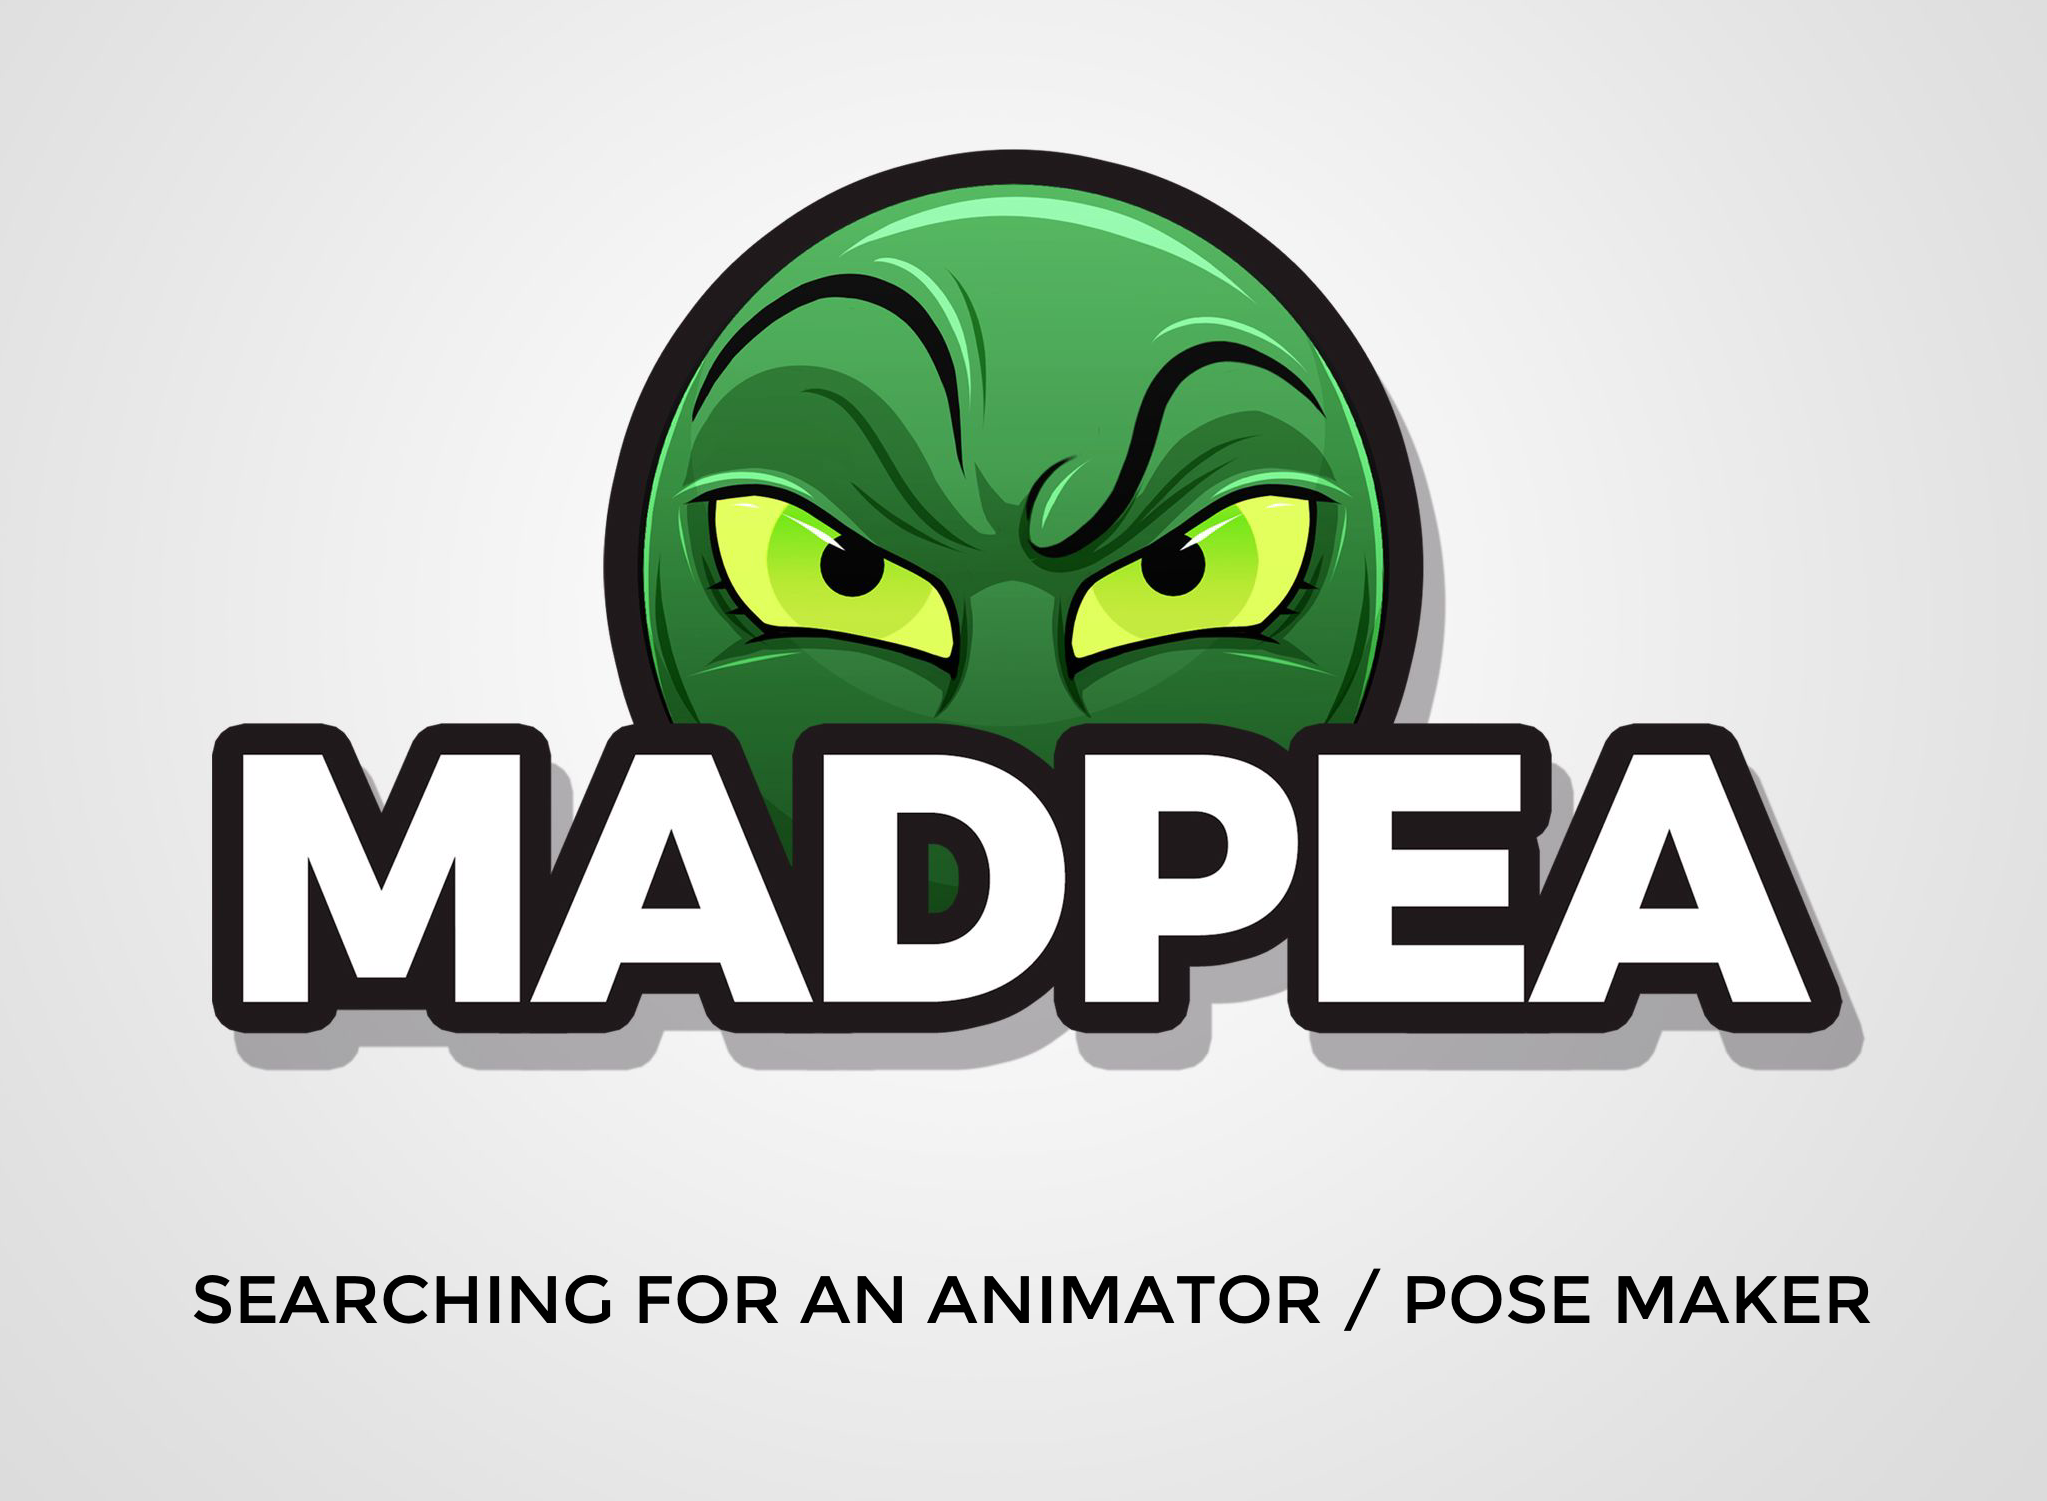 MadPea – Searching For An Animator/Pose Maker